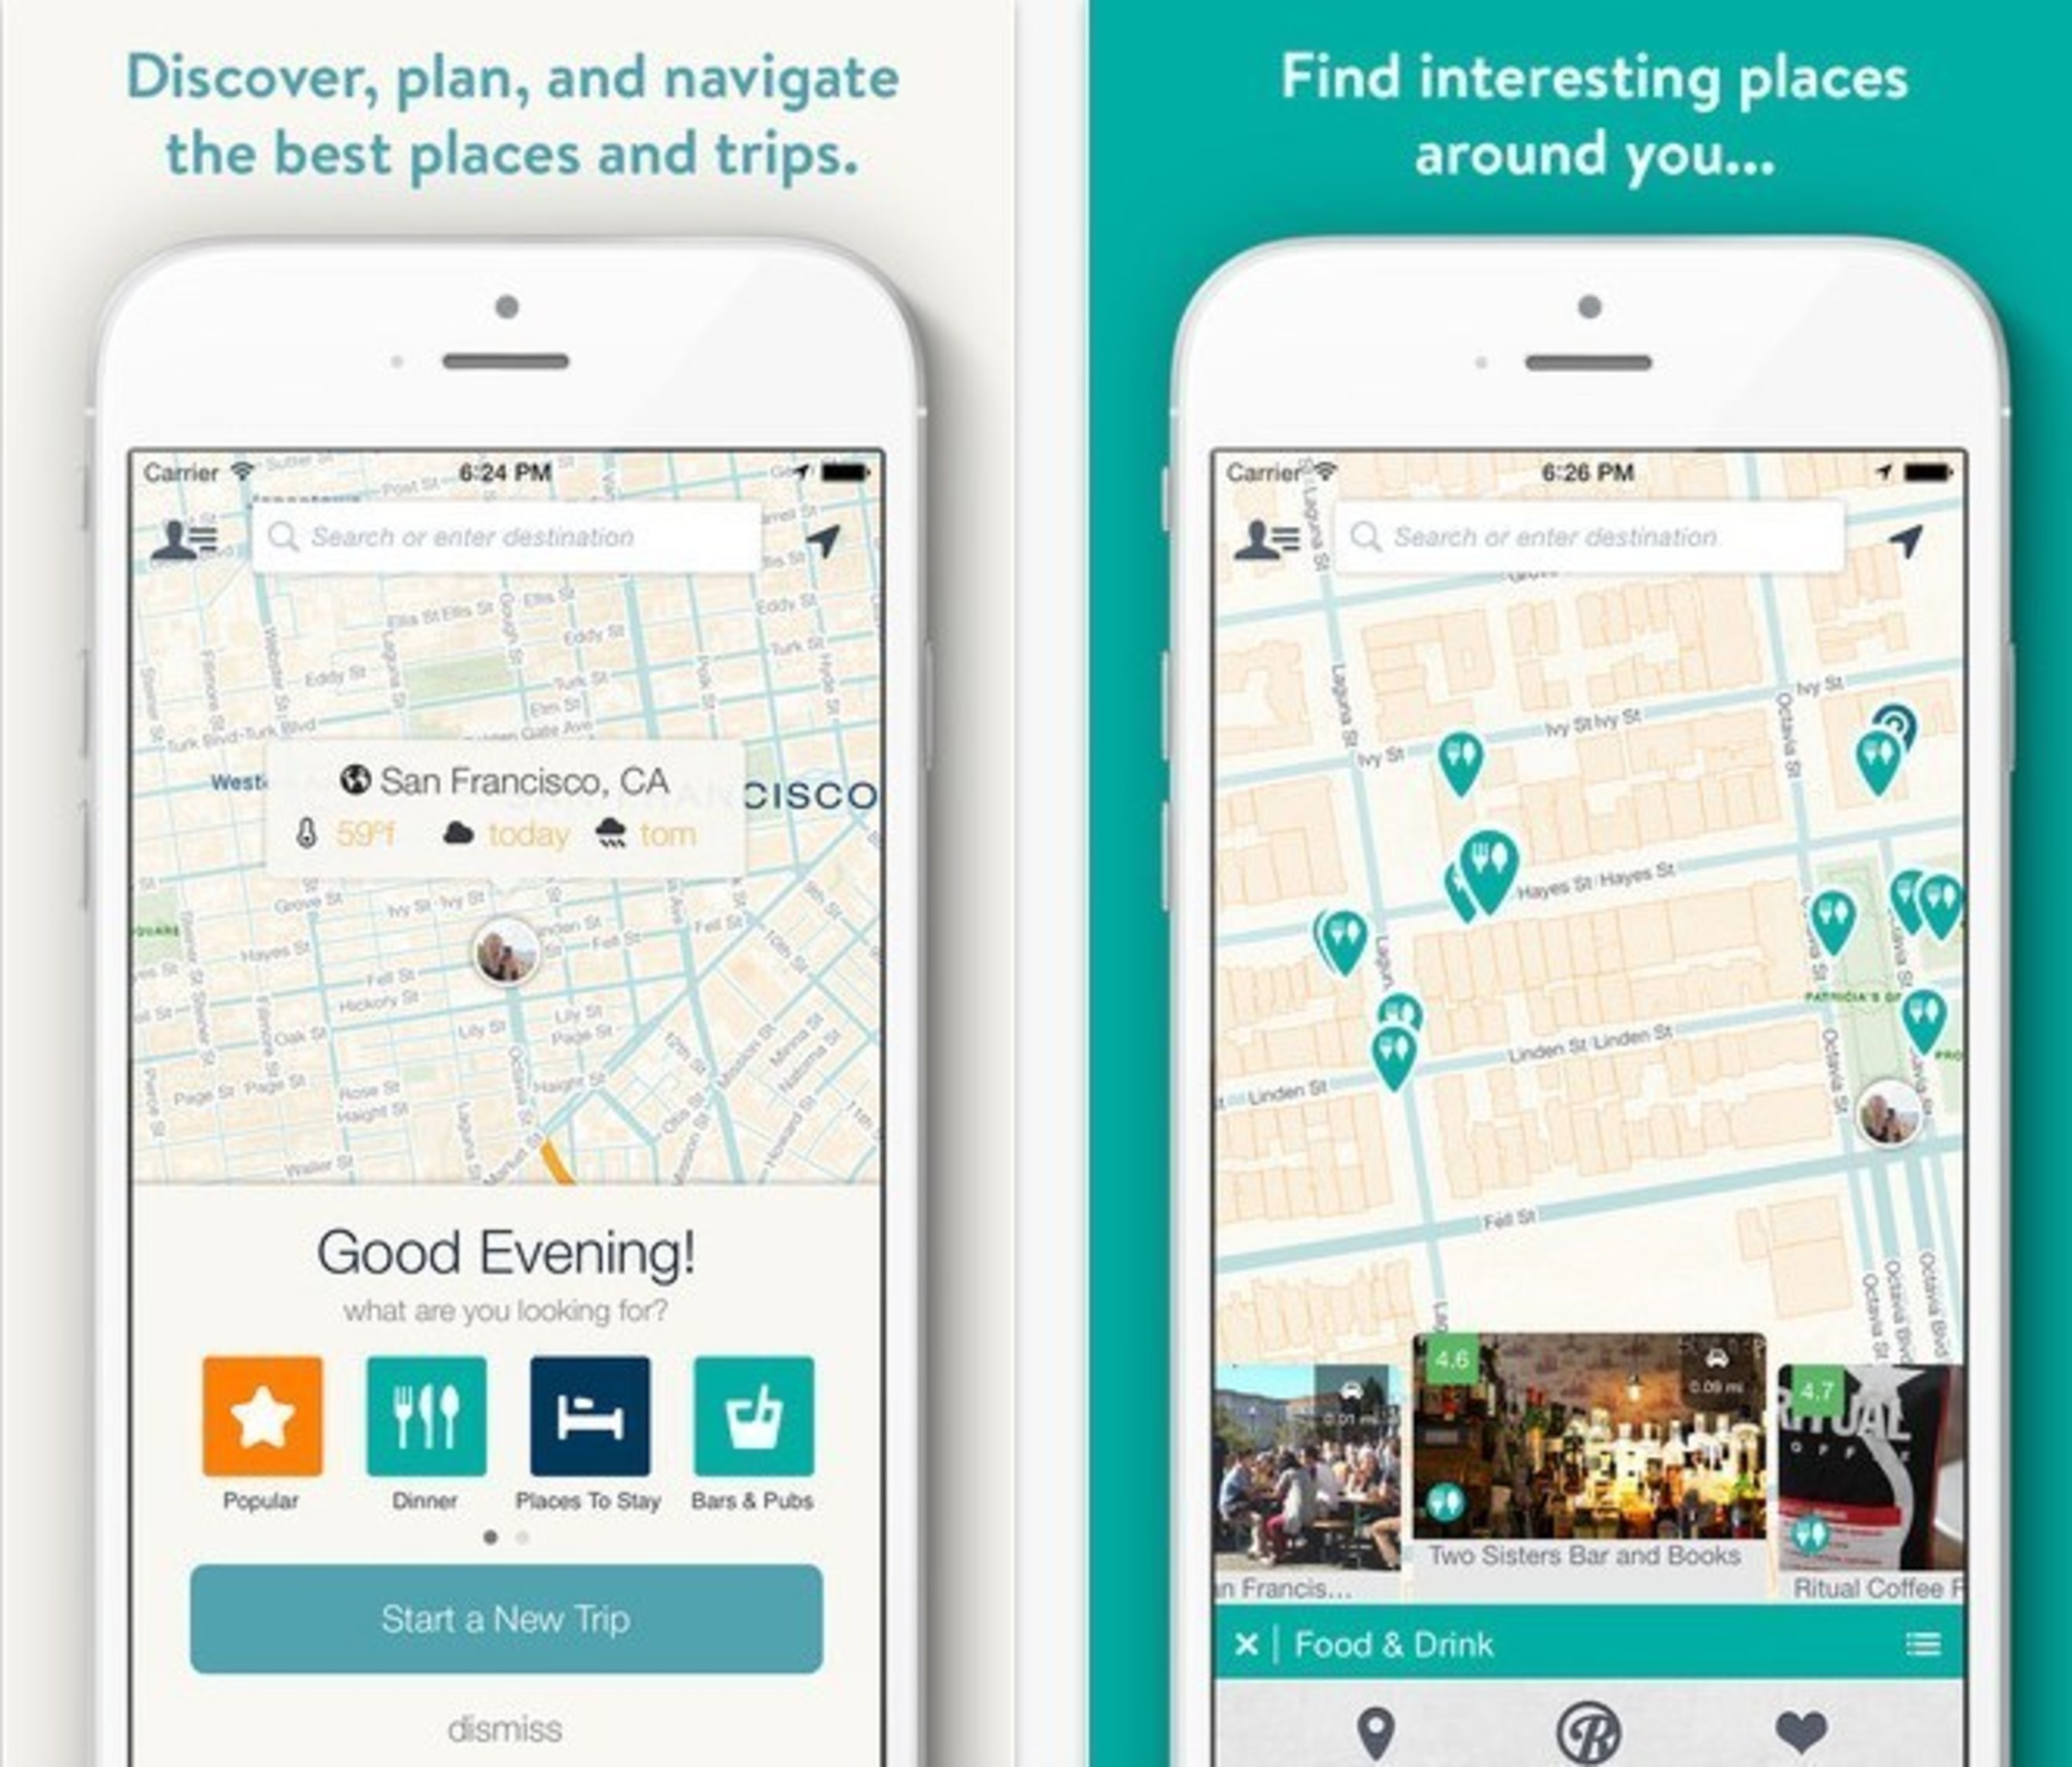 Roadtrippers 3.0 iPhone app is the ultimate road planner. Discover the best diners, scenic spots, attractions hotels, and more with our database of over a million amazing places.